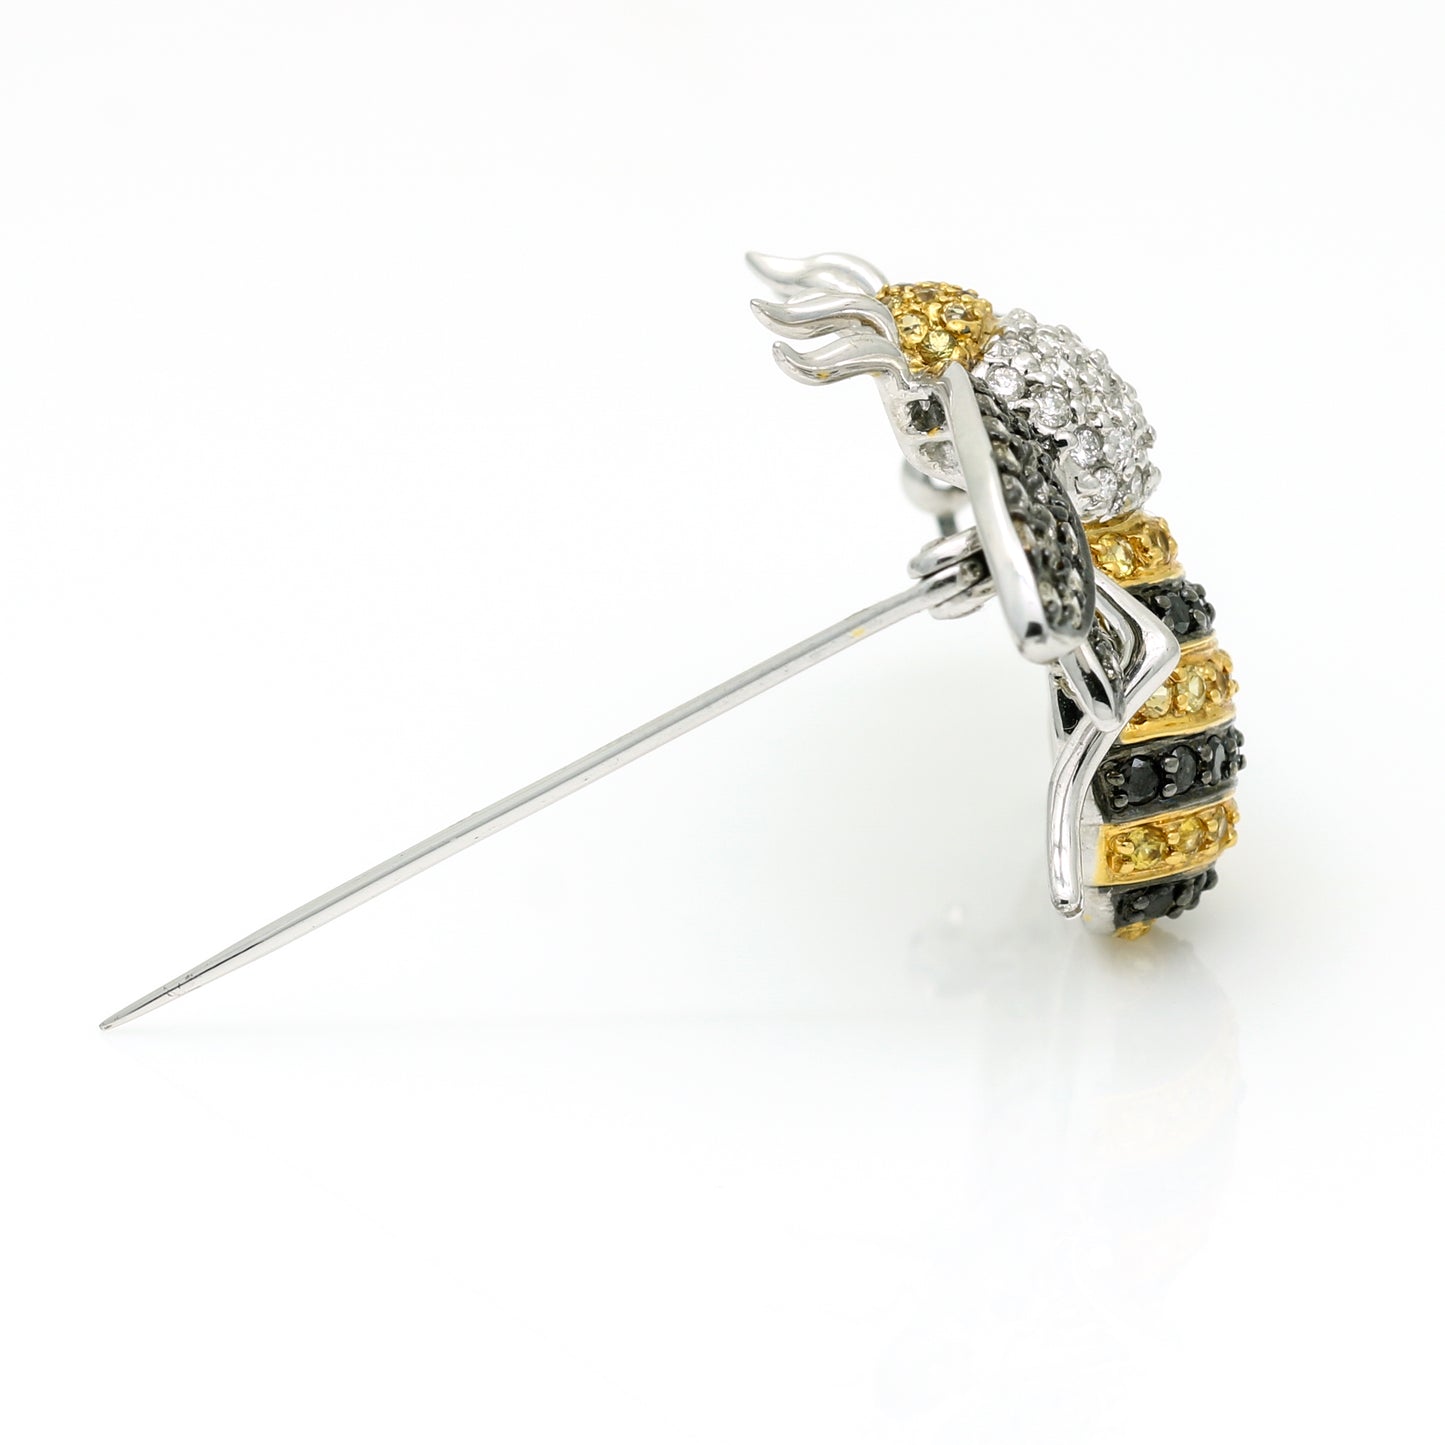 Bumble Bee Fancy Color Pave Diamond Brooch - 18k White Gold